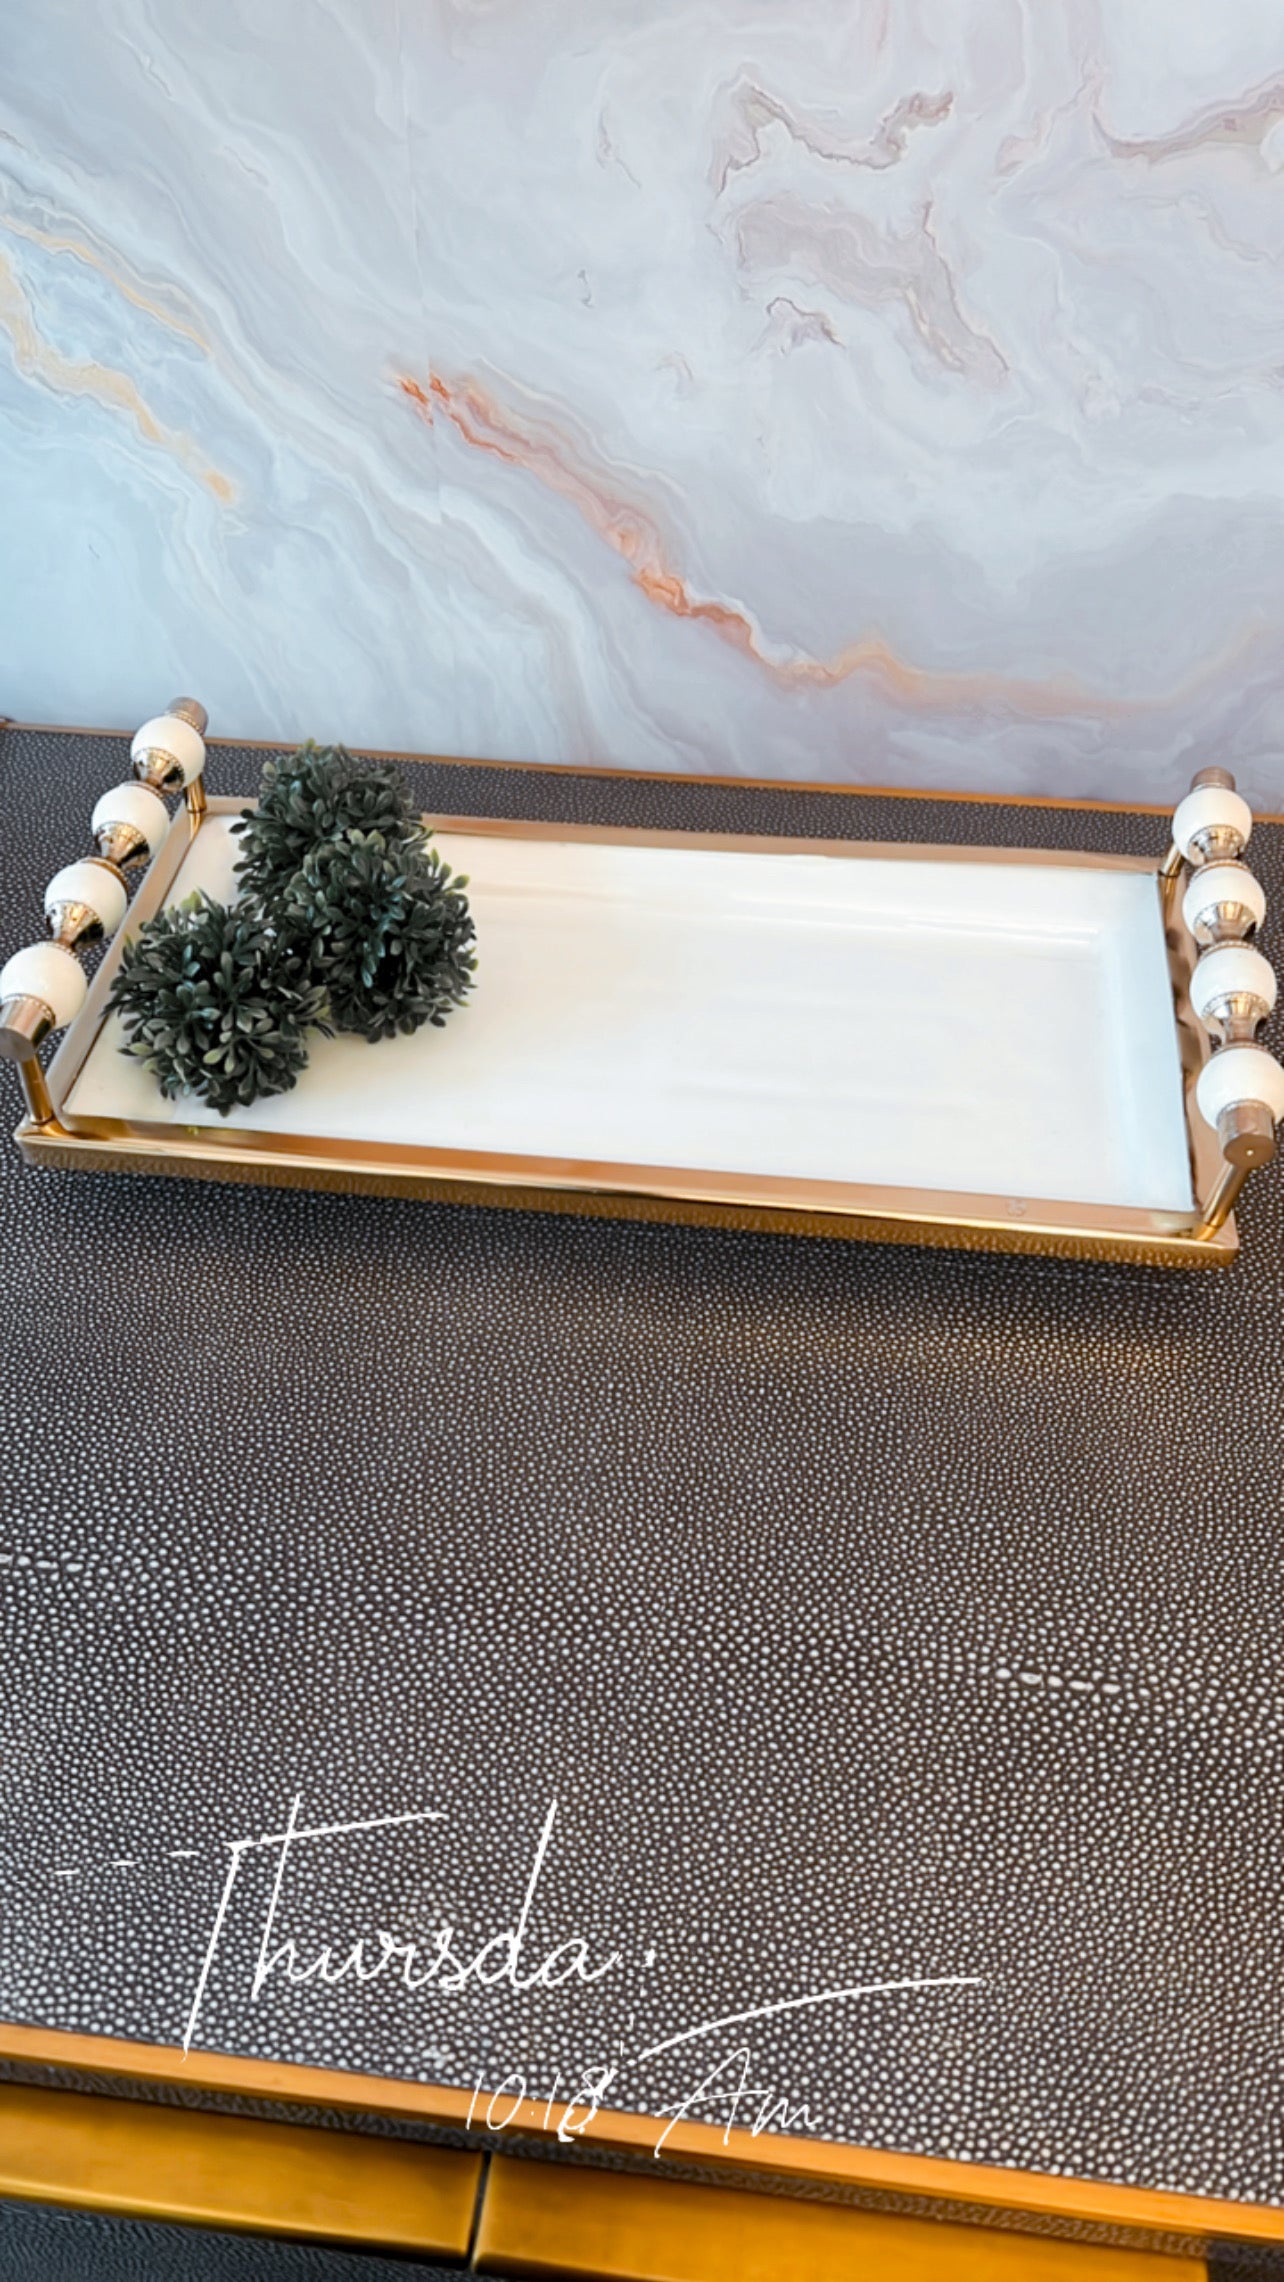 Gold and White RectangularTray with Beaded Handles